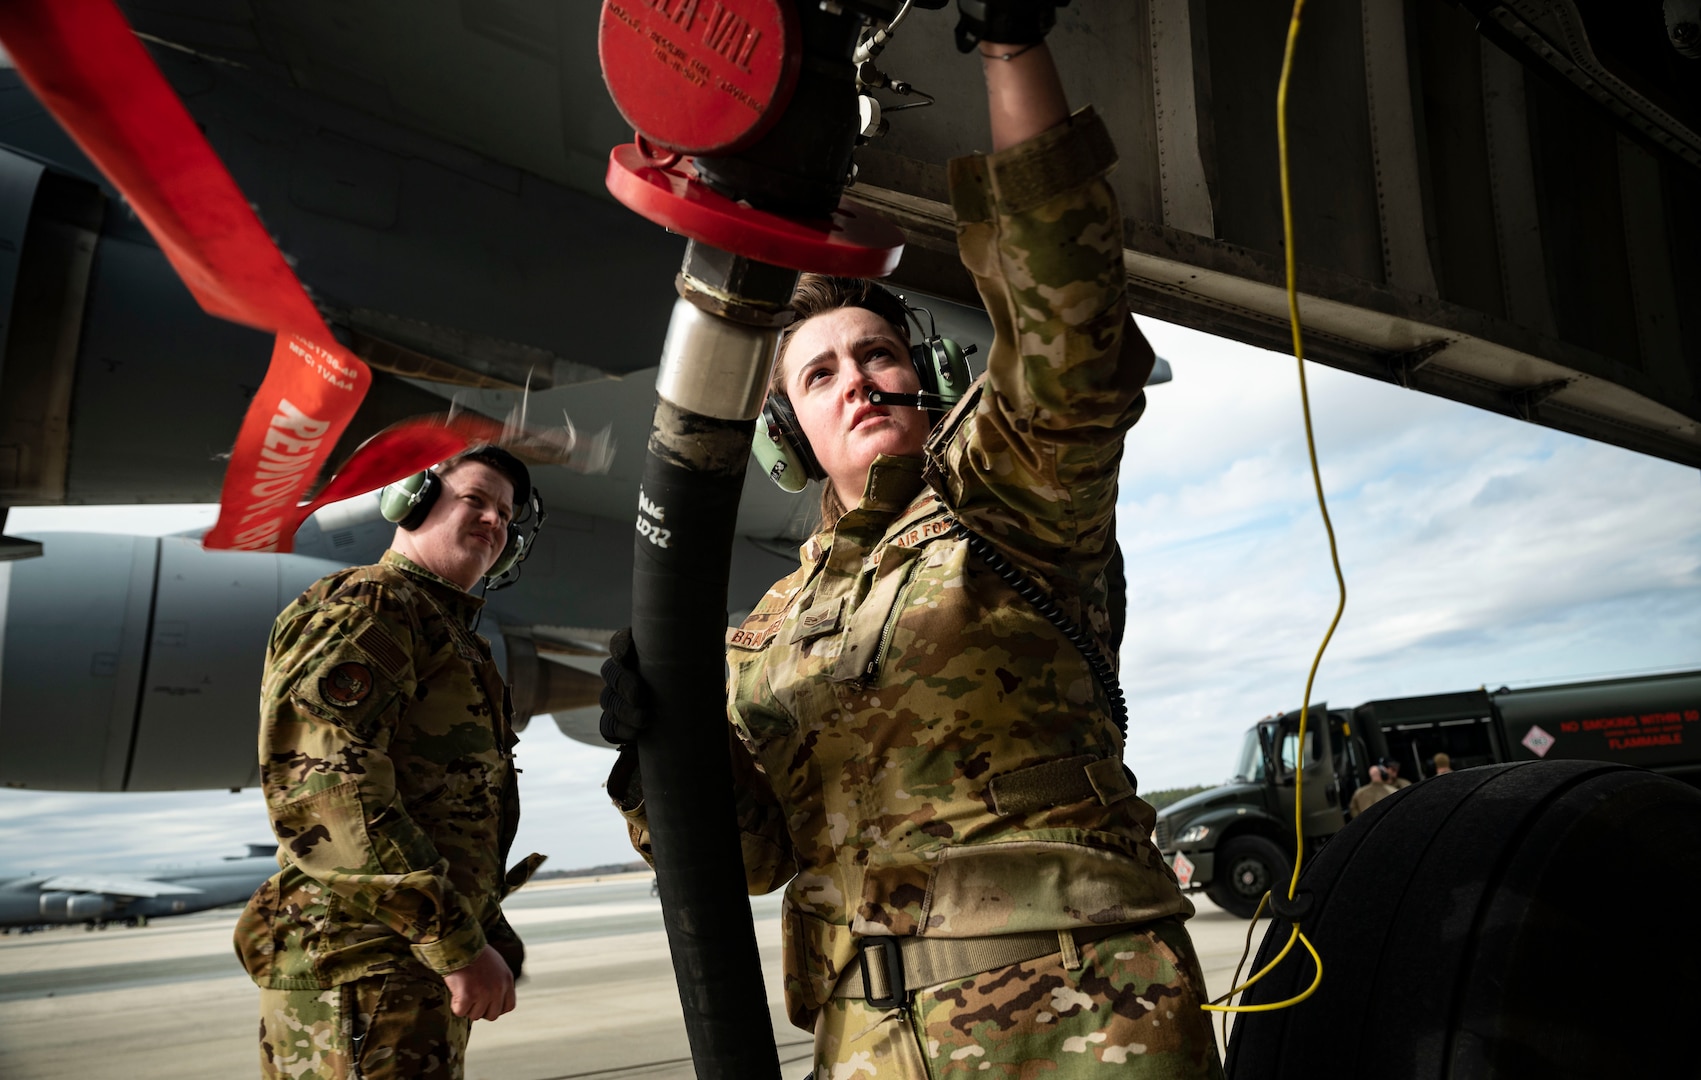 Staff Sgt. Amelia Bradfield, 9th Airlift Squadron loadmaster, secures a fuel hose from an R-11 Refueler onto a C-5M Super Galaxy during a wet wing defuel at Dover Air Force Base, Delaware, March 1, 2023. Aircrew with the 9th AS test out new capabilities that allow the C-5 to act as a mobile fuel station and deposit fuel from the aircraft fuel tanks, into tankers standing by. (U.S. Air Force photo by Staff Sgt. Marco A. Gomez)